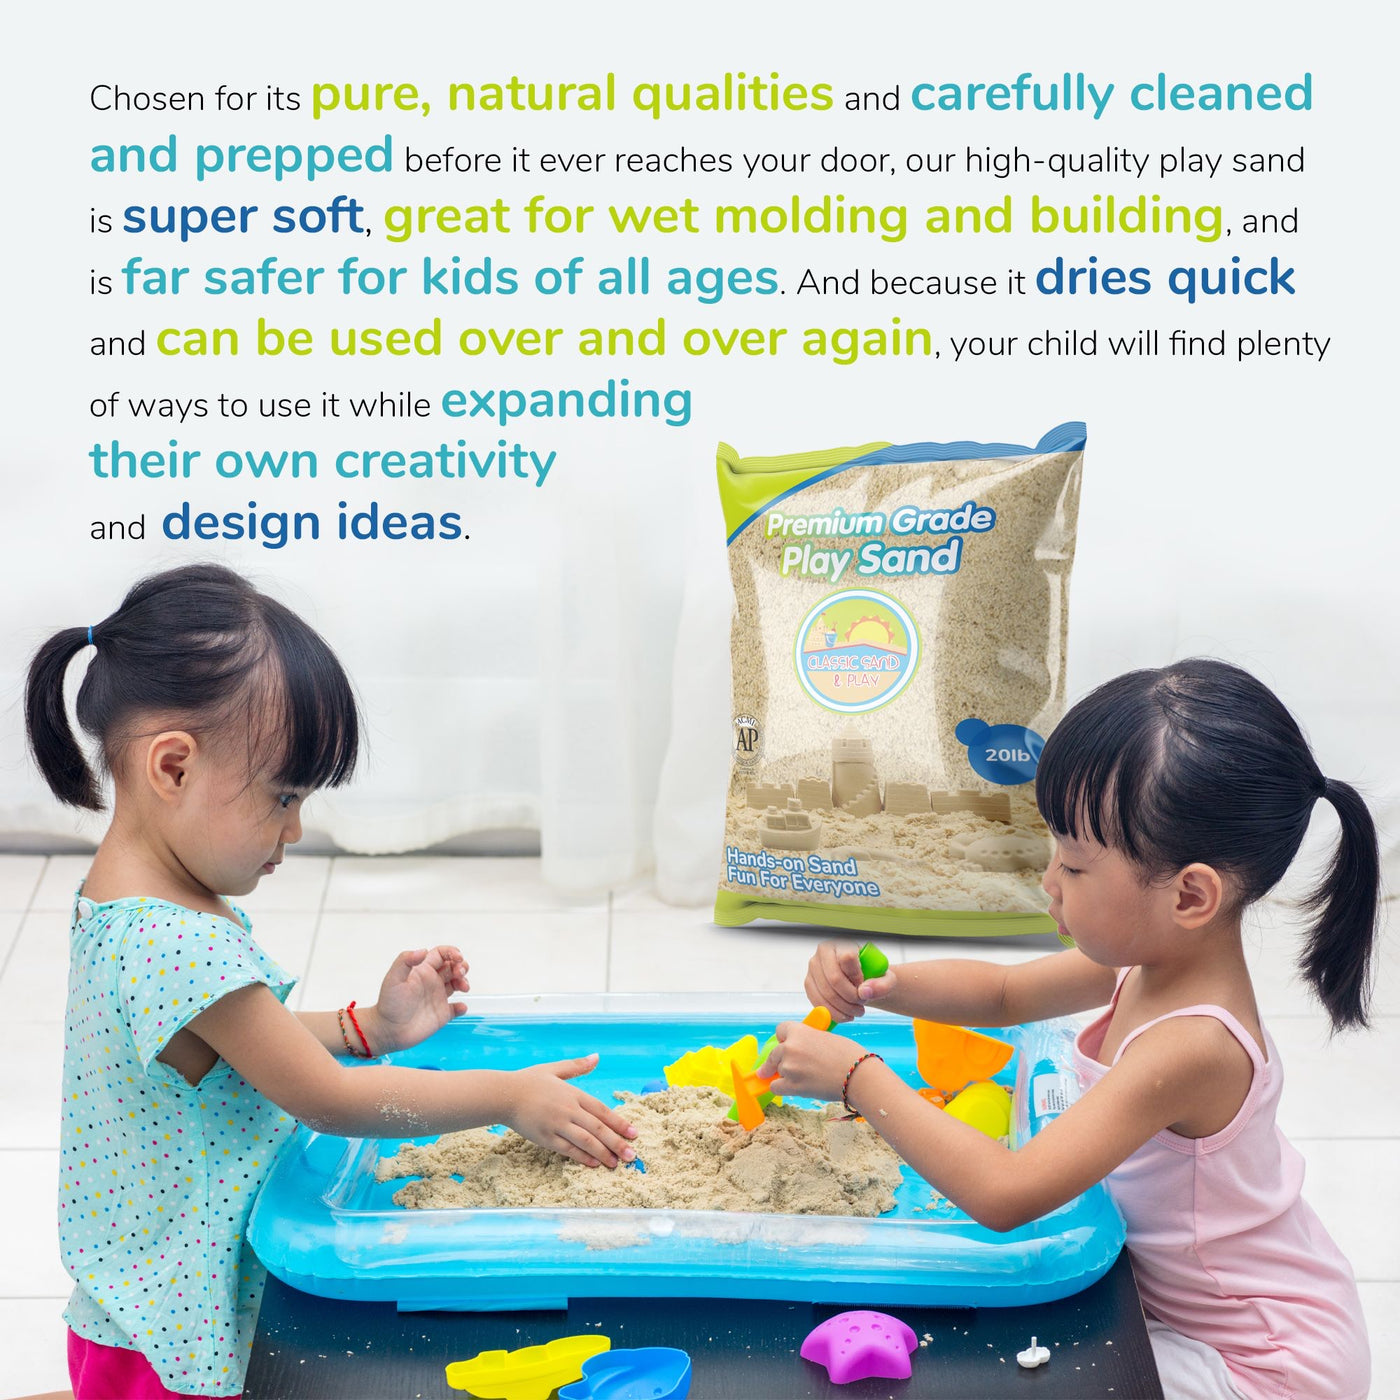 Classic Sand and Play Sand for Sandbox, Table, Therapy, and Outdoor Us –  Central Florida Sunshine Distributors